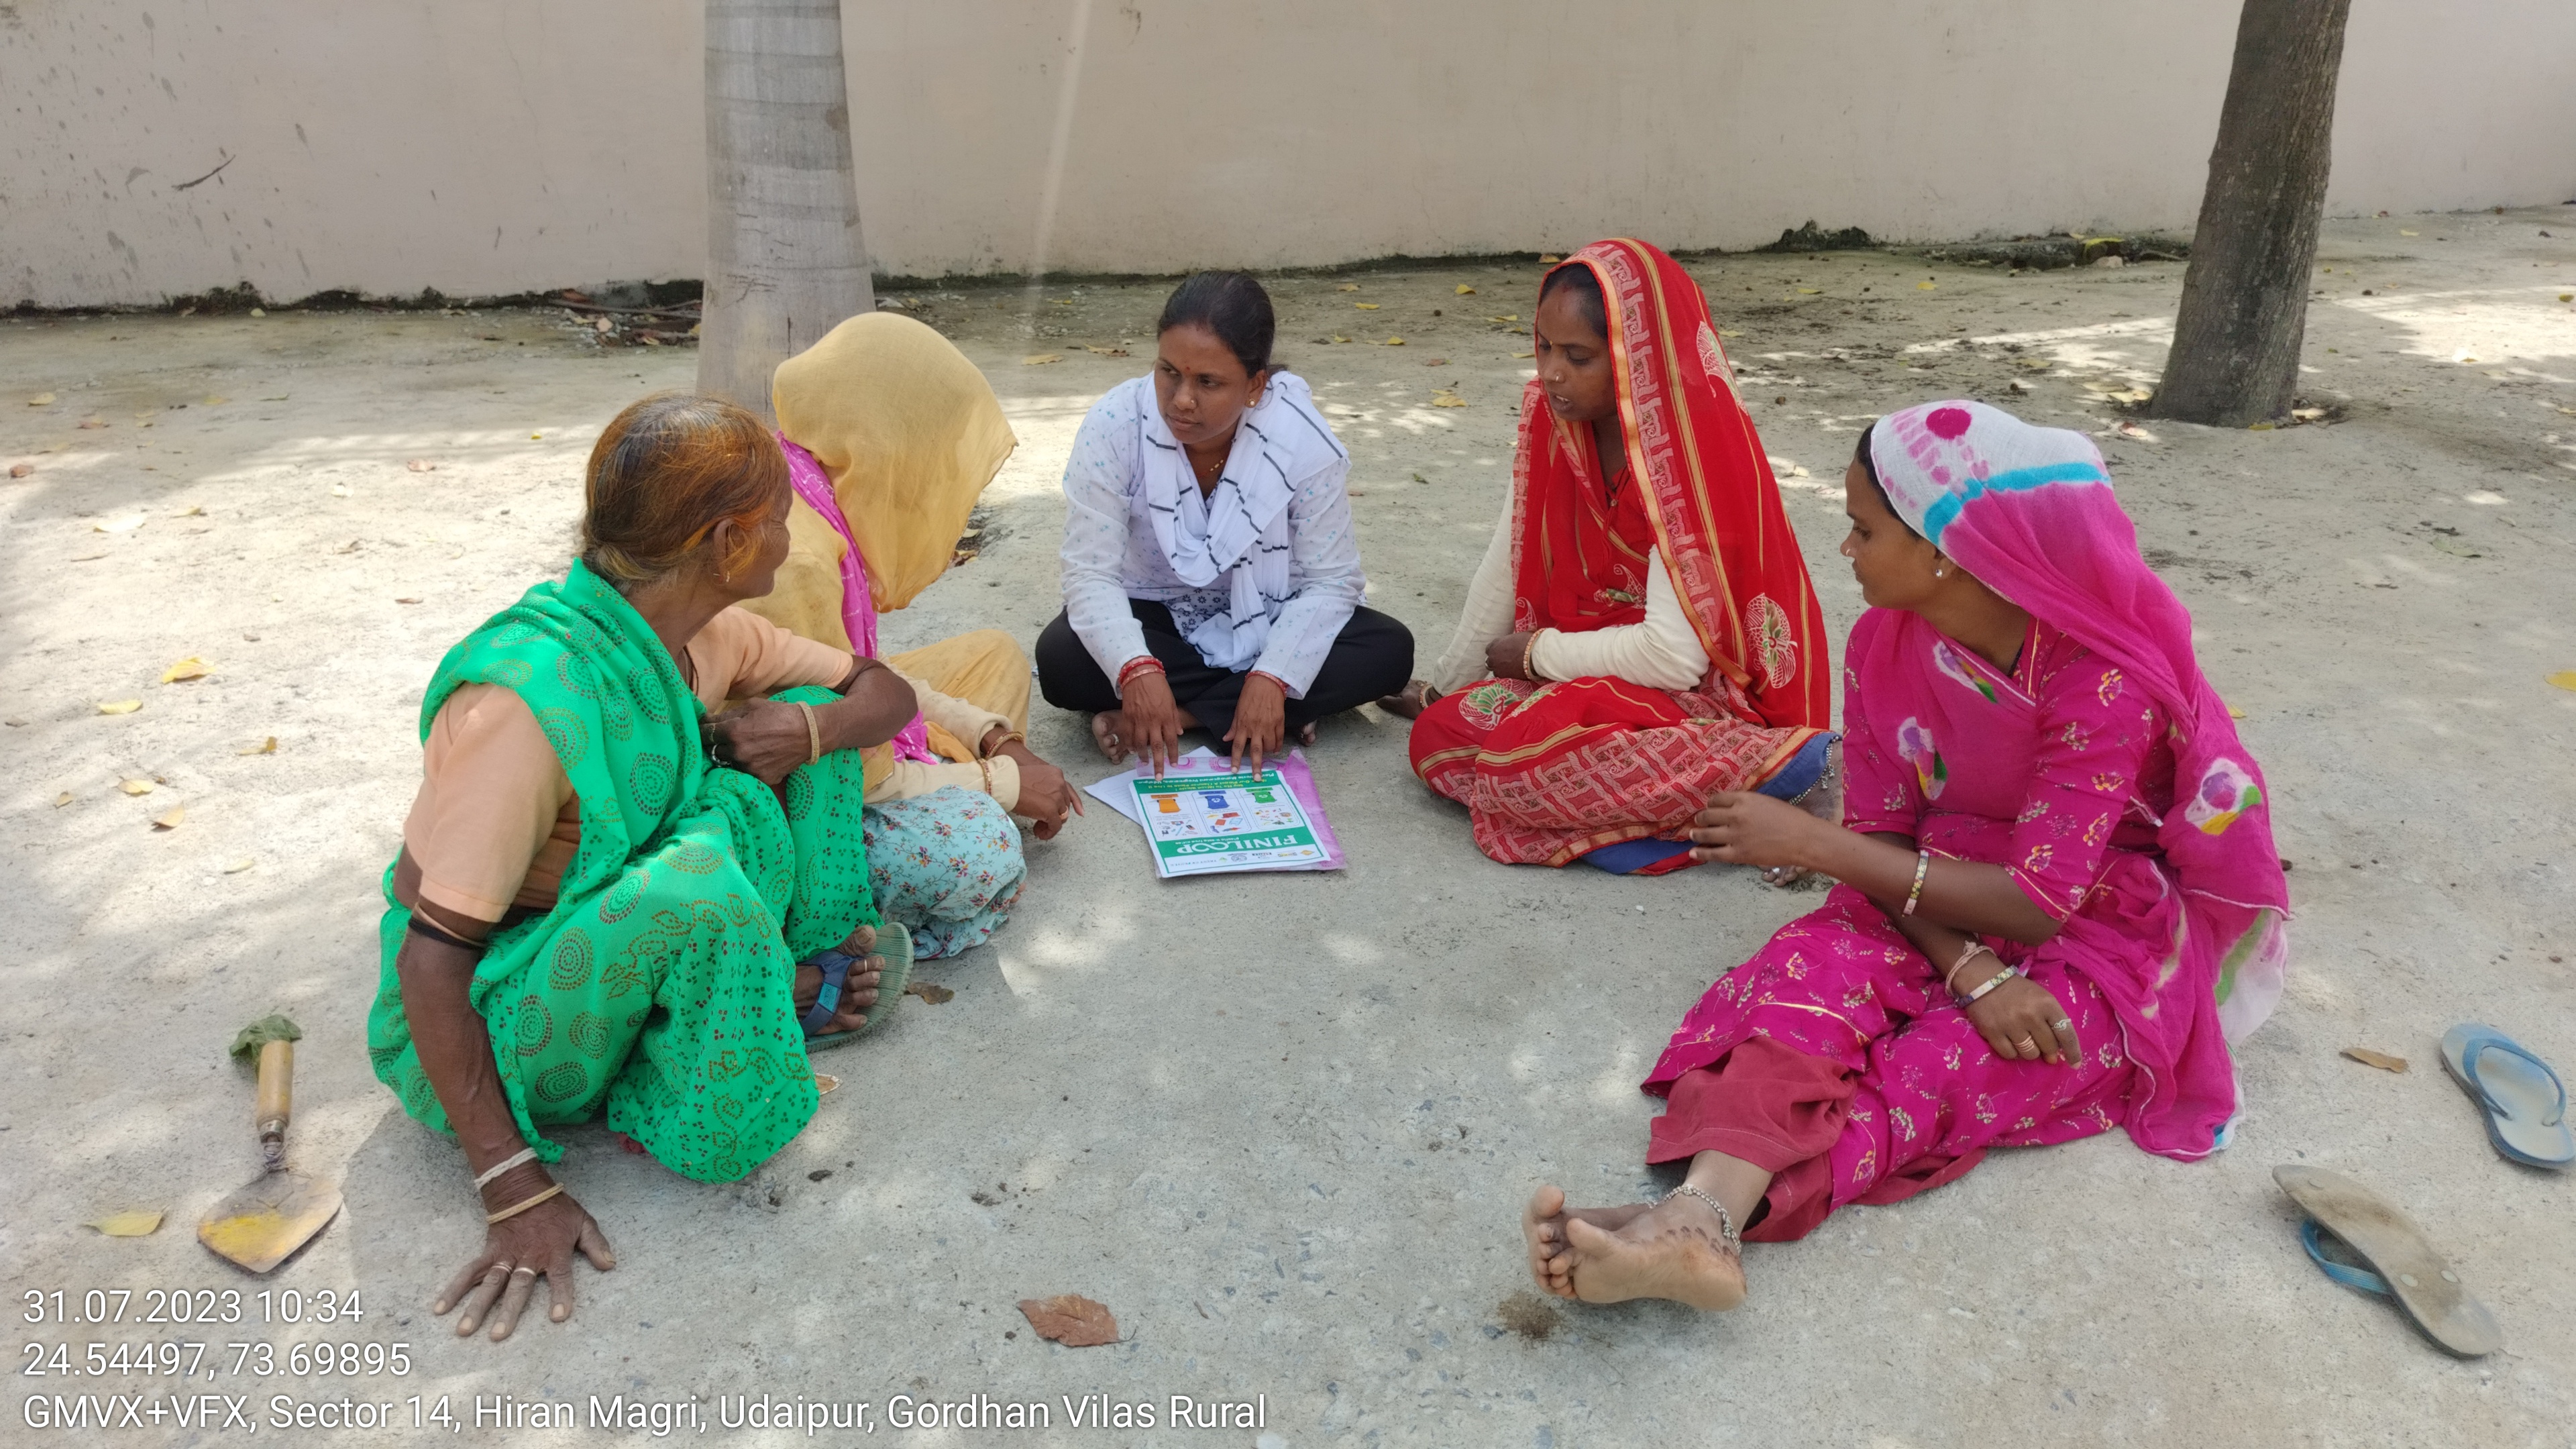 Awareness raising activity on segregation practices in Udaipur with five women sat around in a circle.